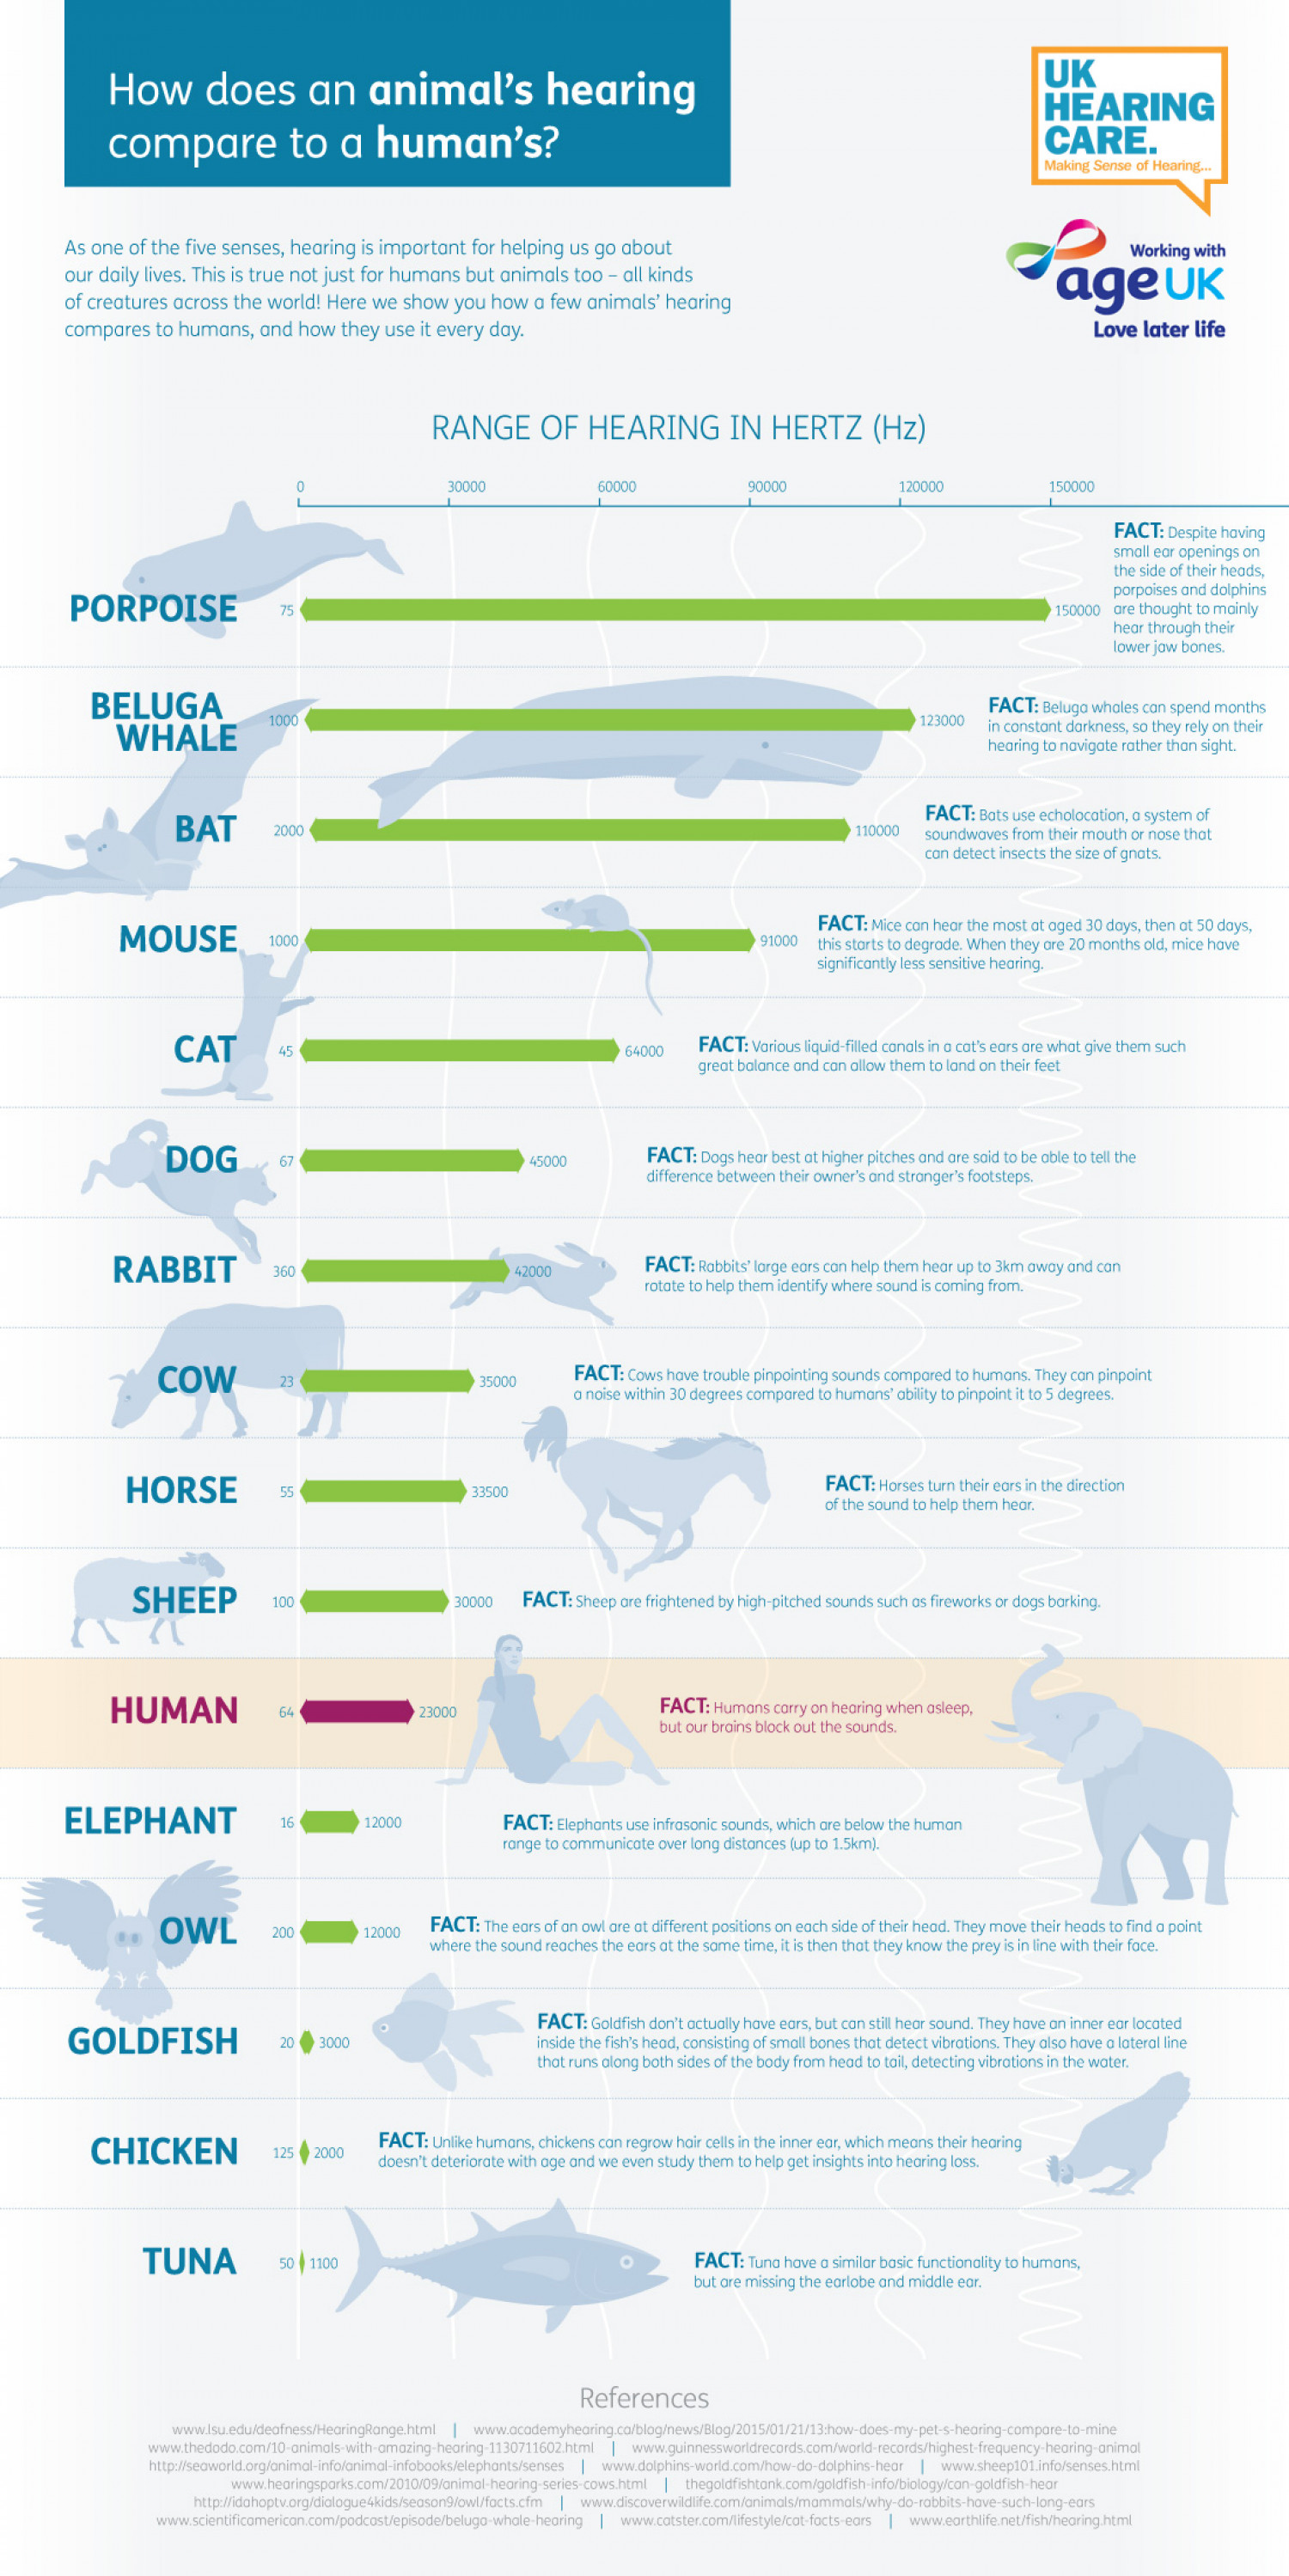 What is the difference between human hearing and animal hearing?